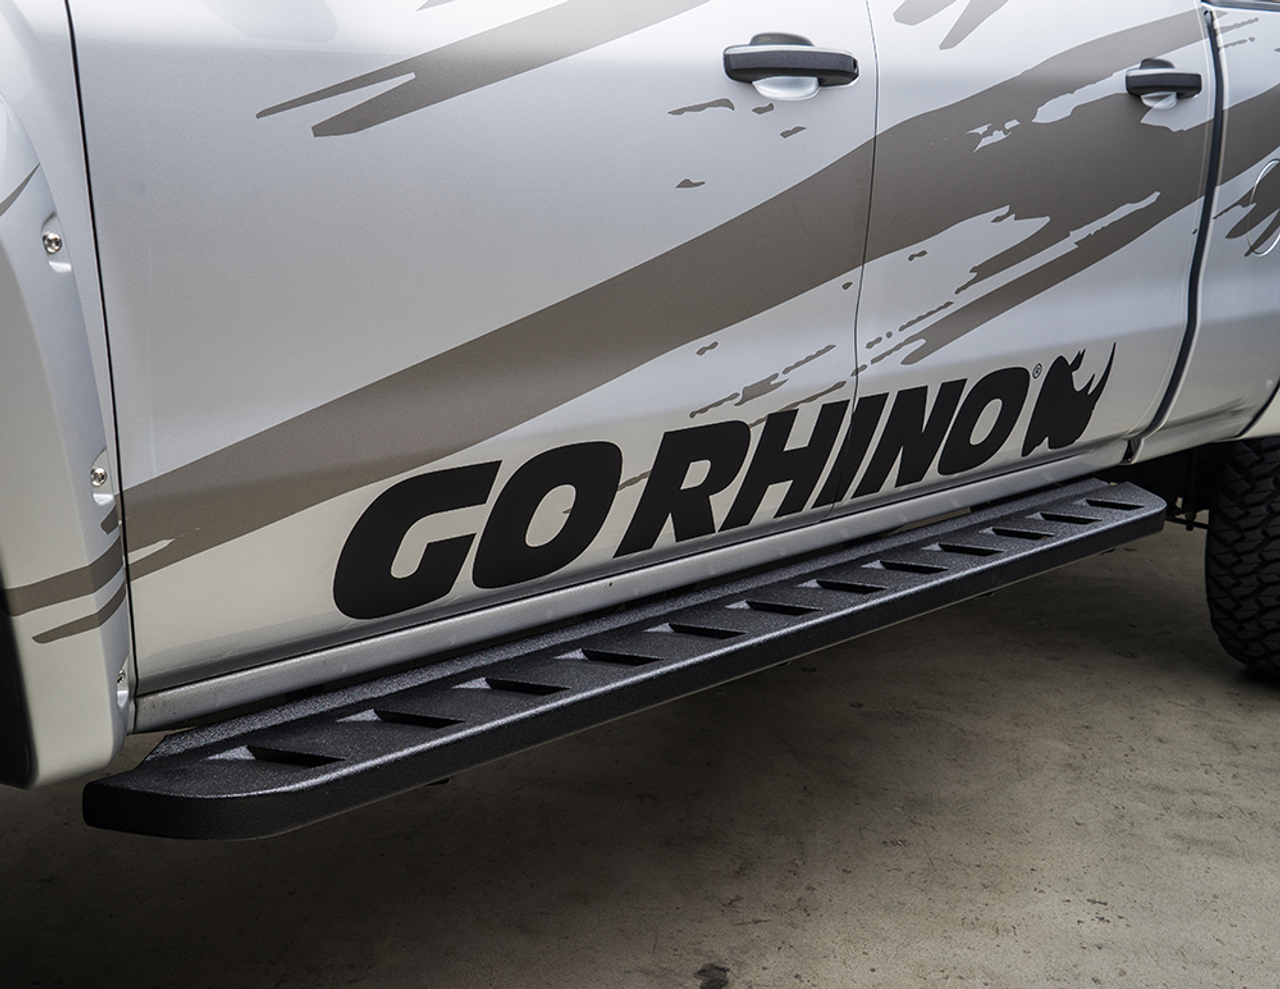 Go Rhino 6340478720PC Chevy, Silverado 1500 LD (Classic), 2014-2019, RB10 Running boards - Complete Kit: 2 pair RB10 Drop Steps, Galvanized Steel, Textured black, 630087PC RB10 + 6940475 RB Brackets + (2) 69420000PC Drop Step, Classic Body Only